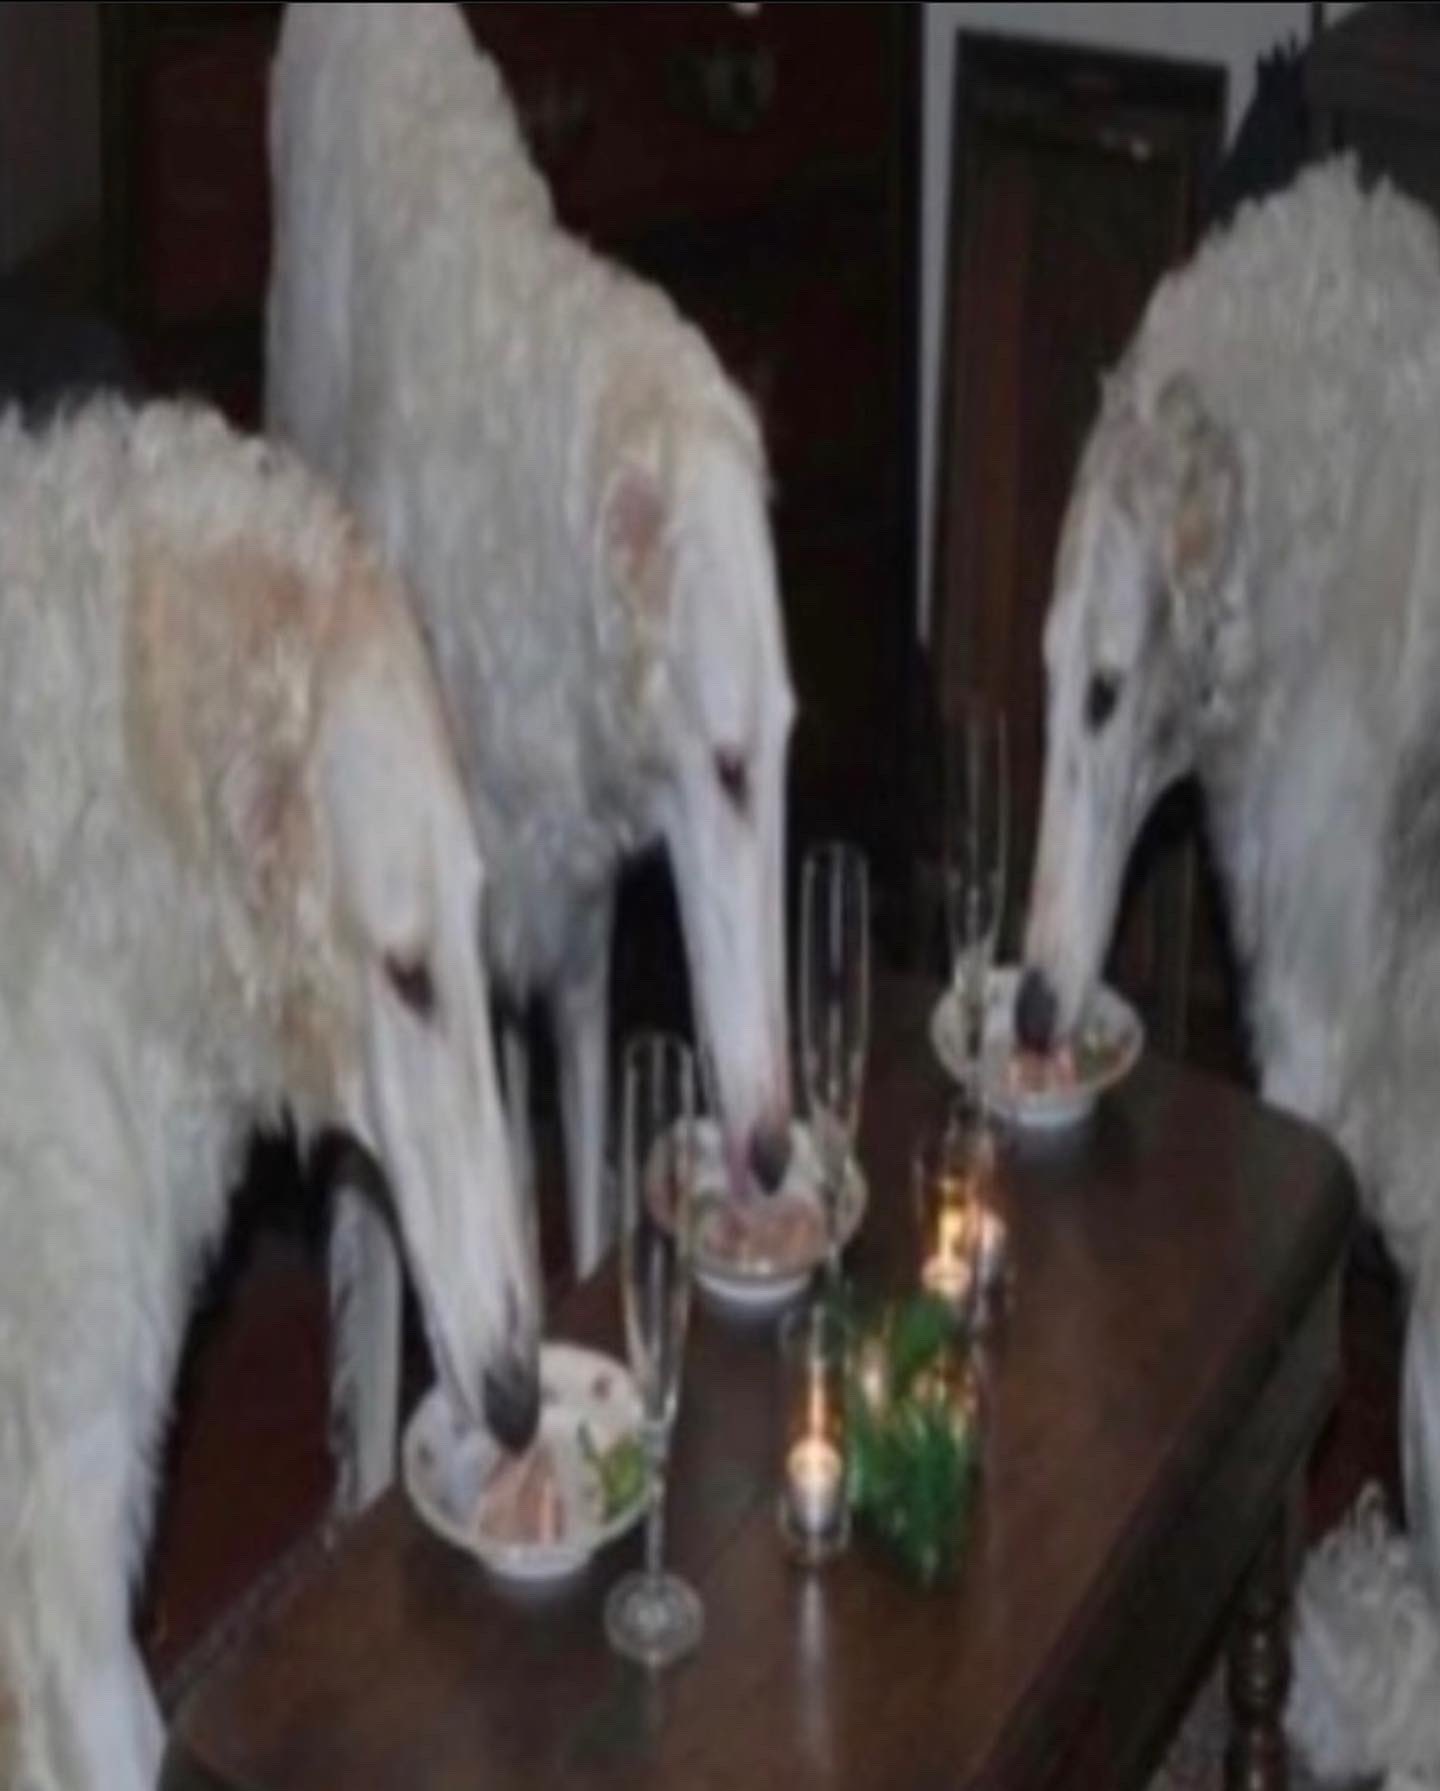 does the borzoi have rabies